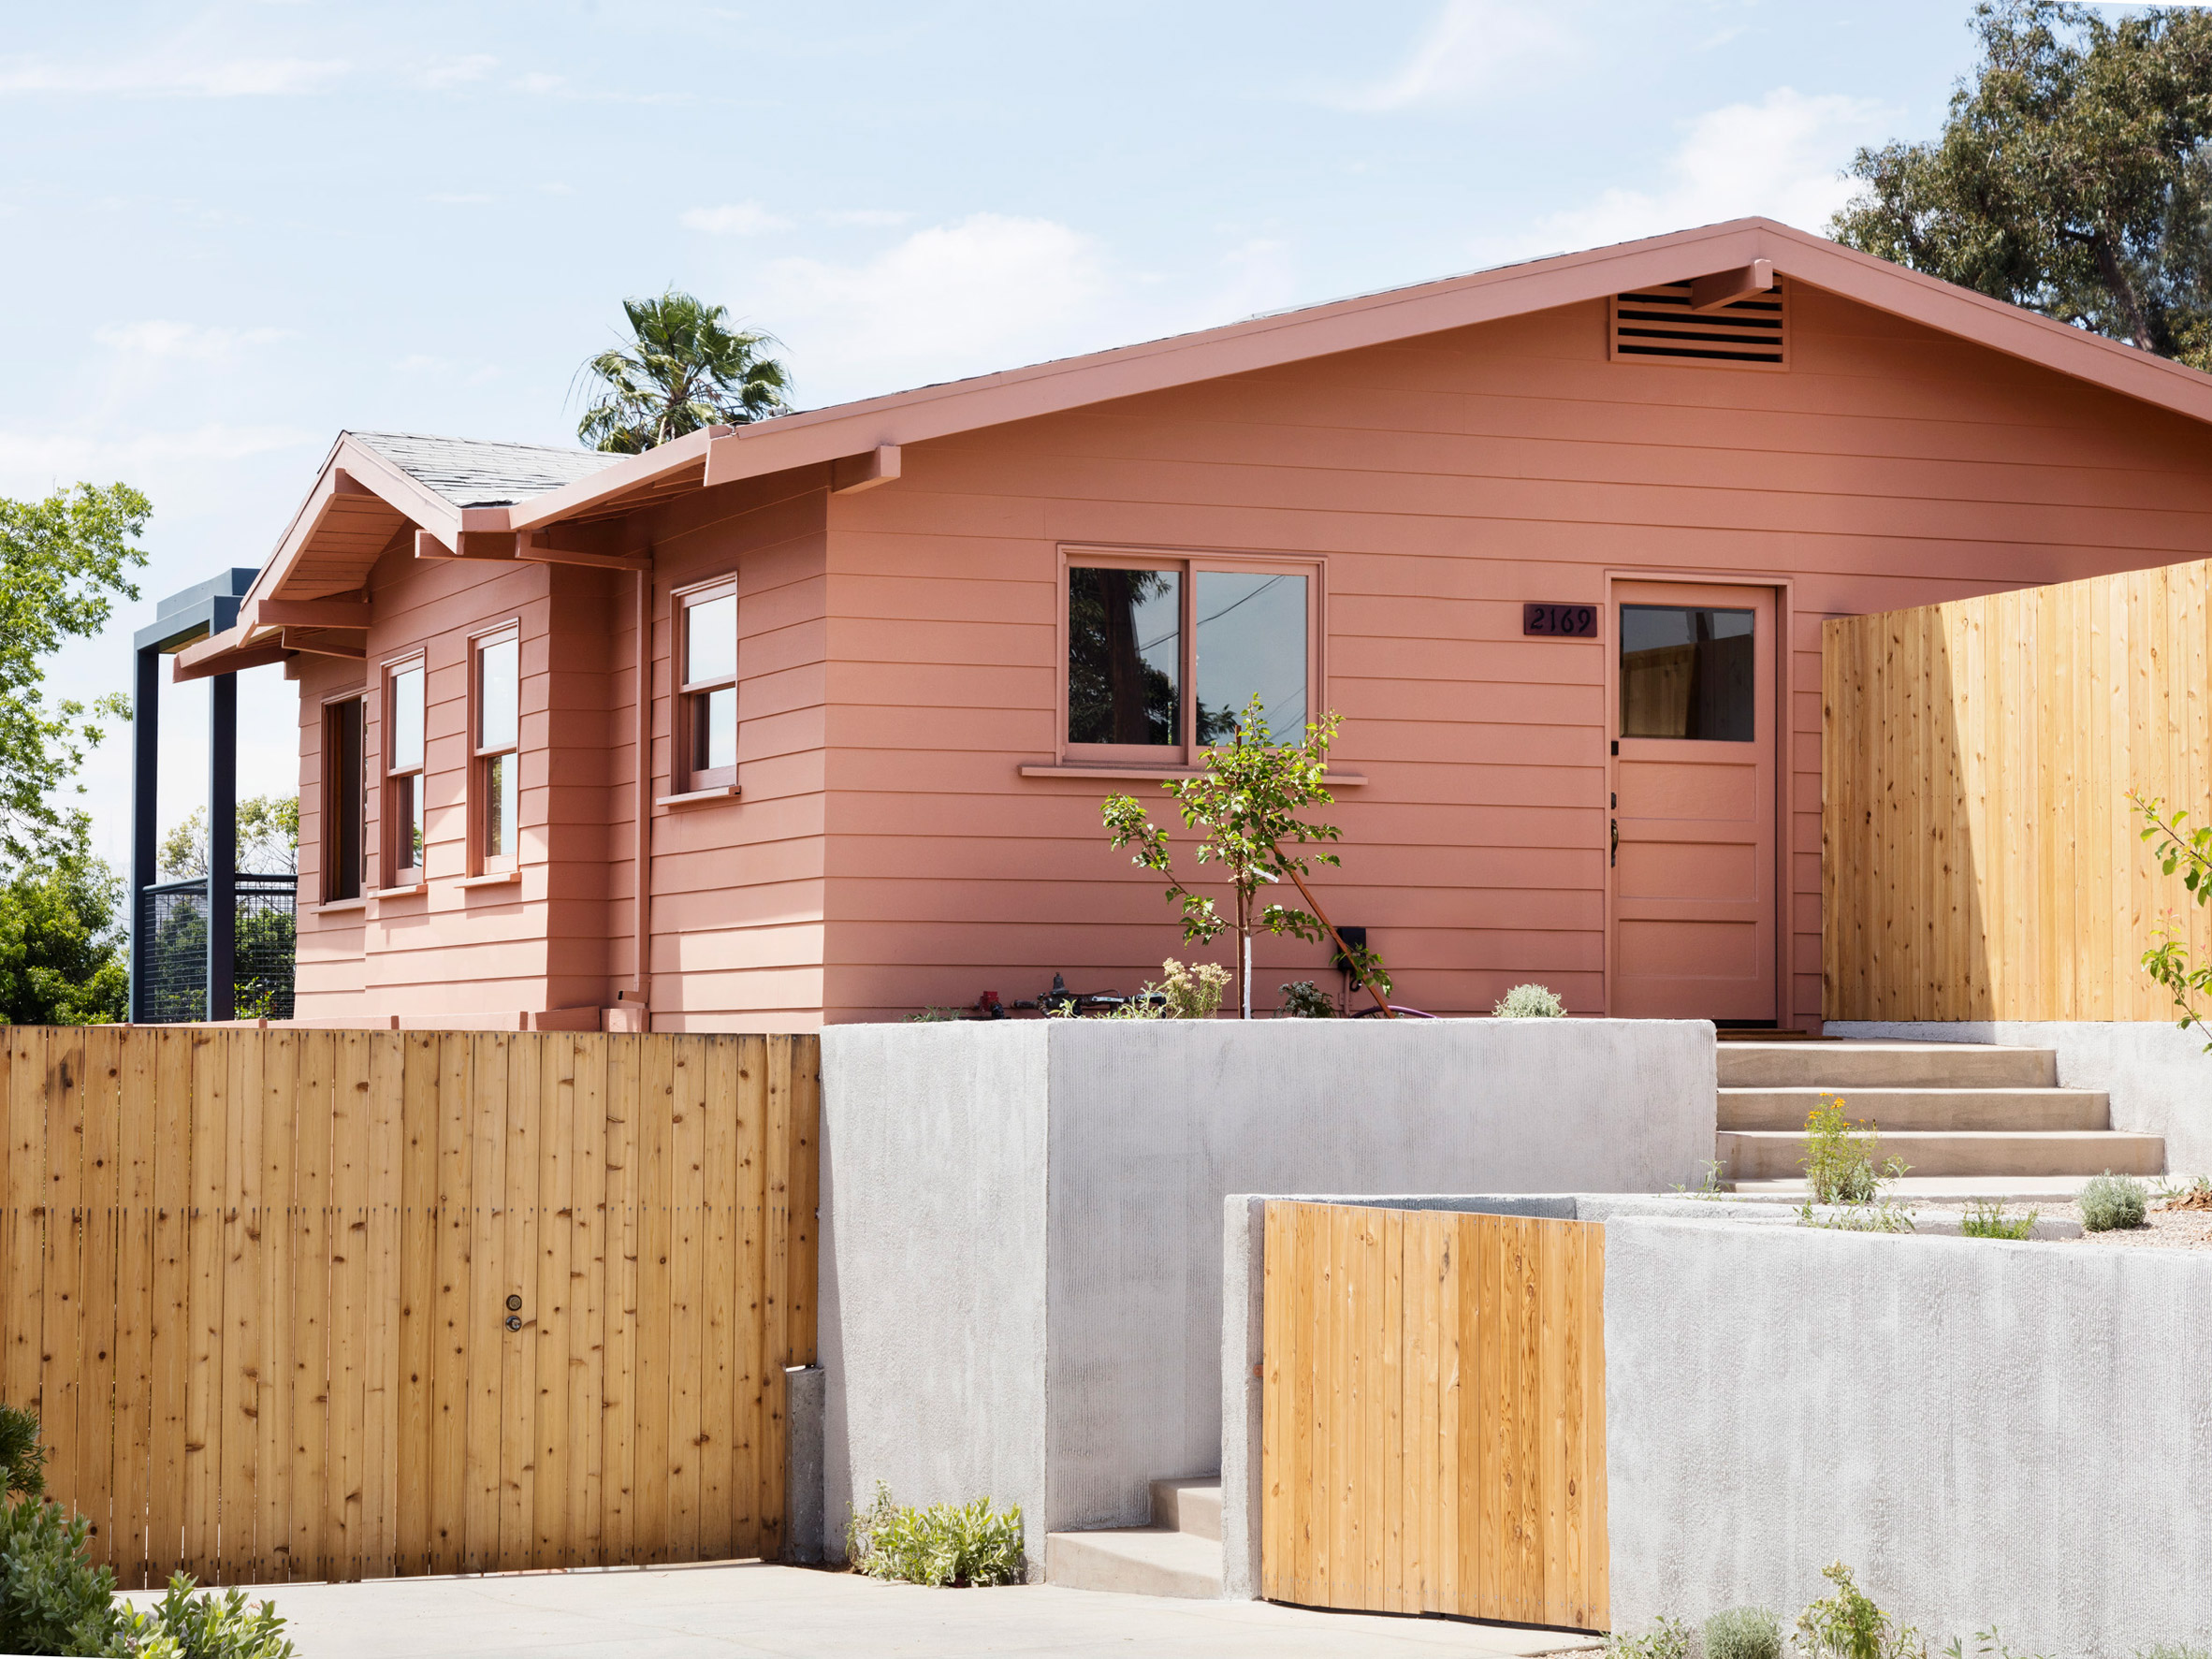 Productora adds steel-frame extension to pink bungalow in Los Angeles